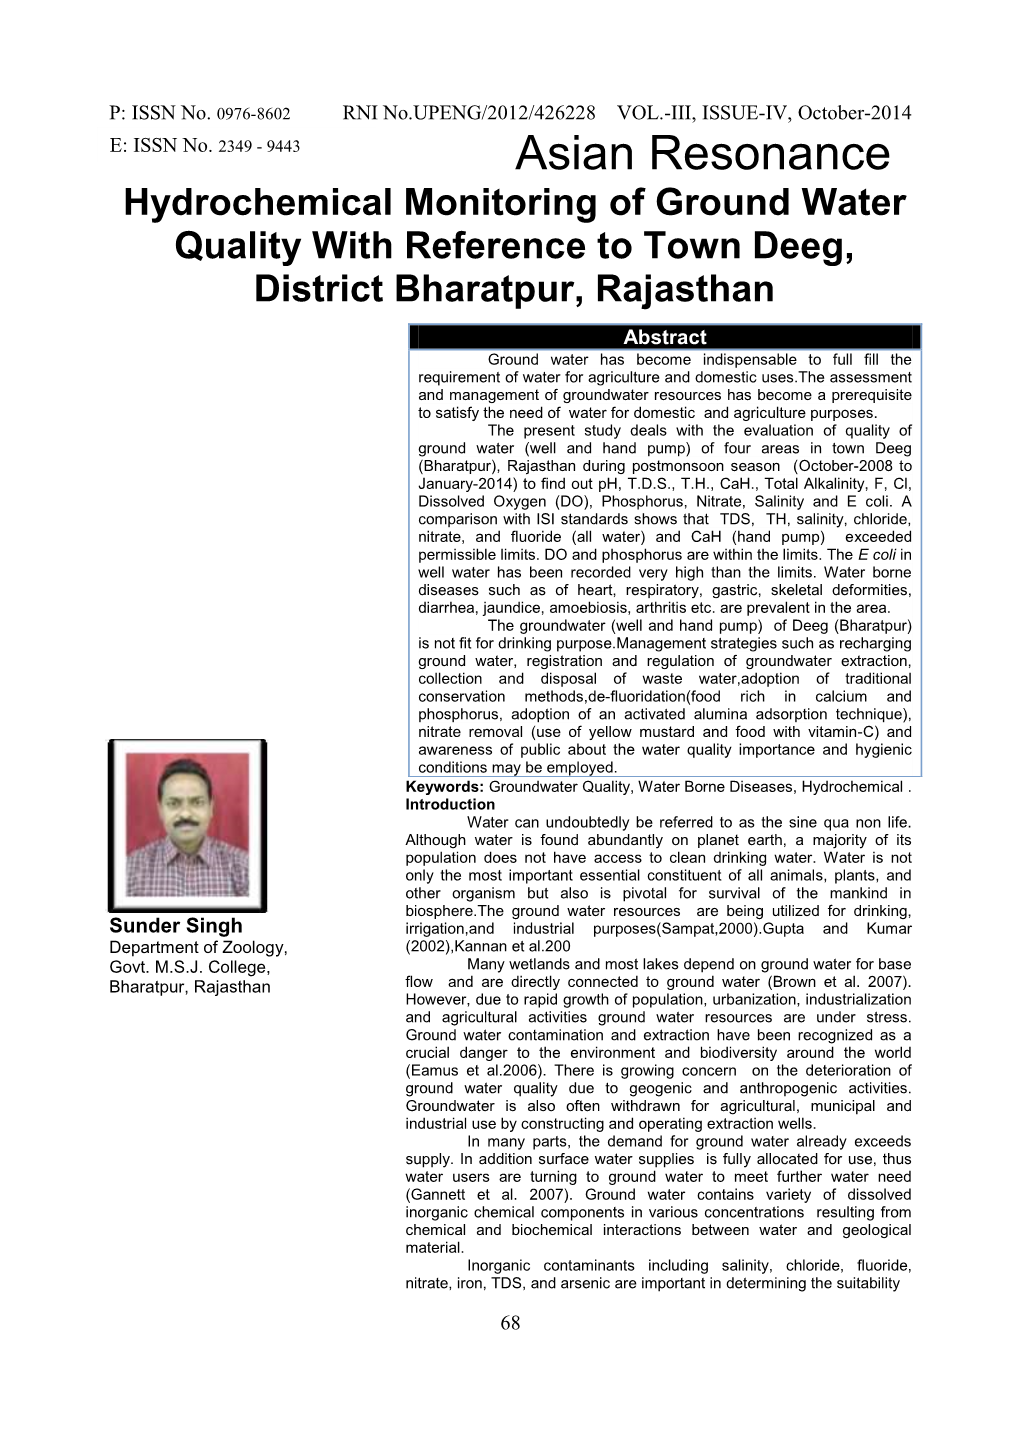 Hydrochemical Monitoring of Ground Water Quality with Reference to Town Deeg, District Bharatpur, Rajasthan